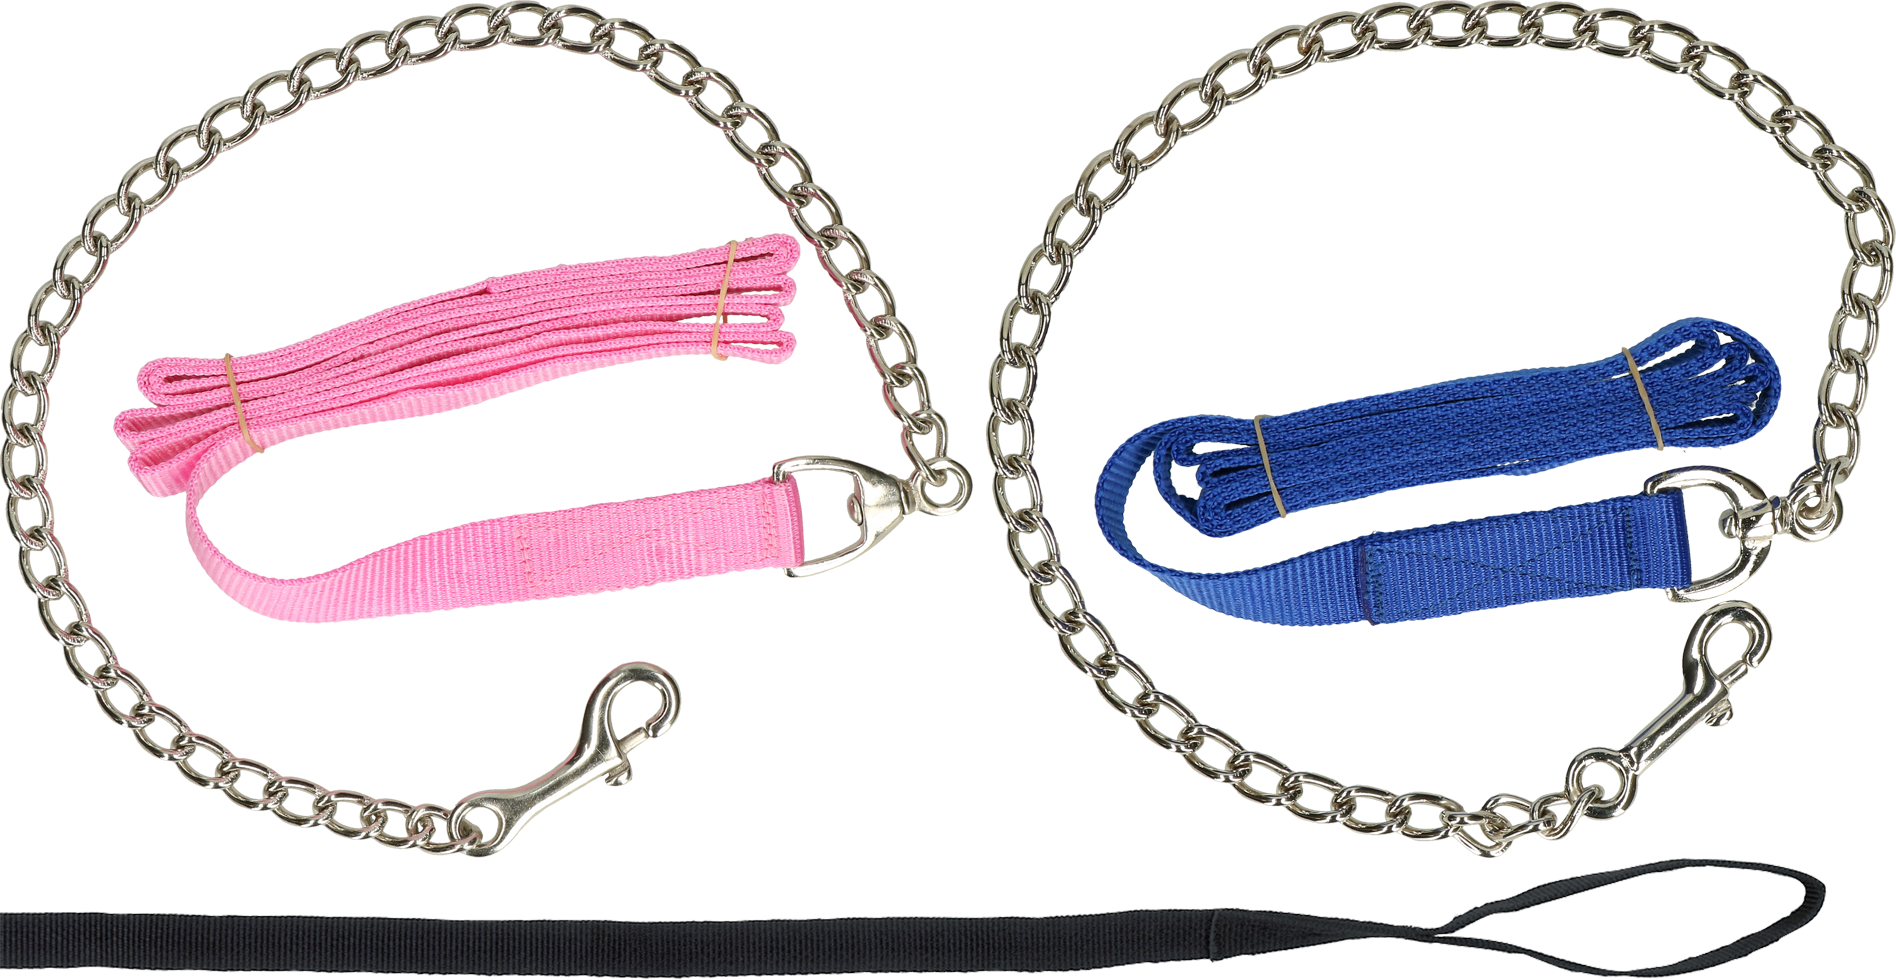 Lead rope with chain